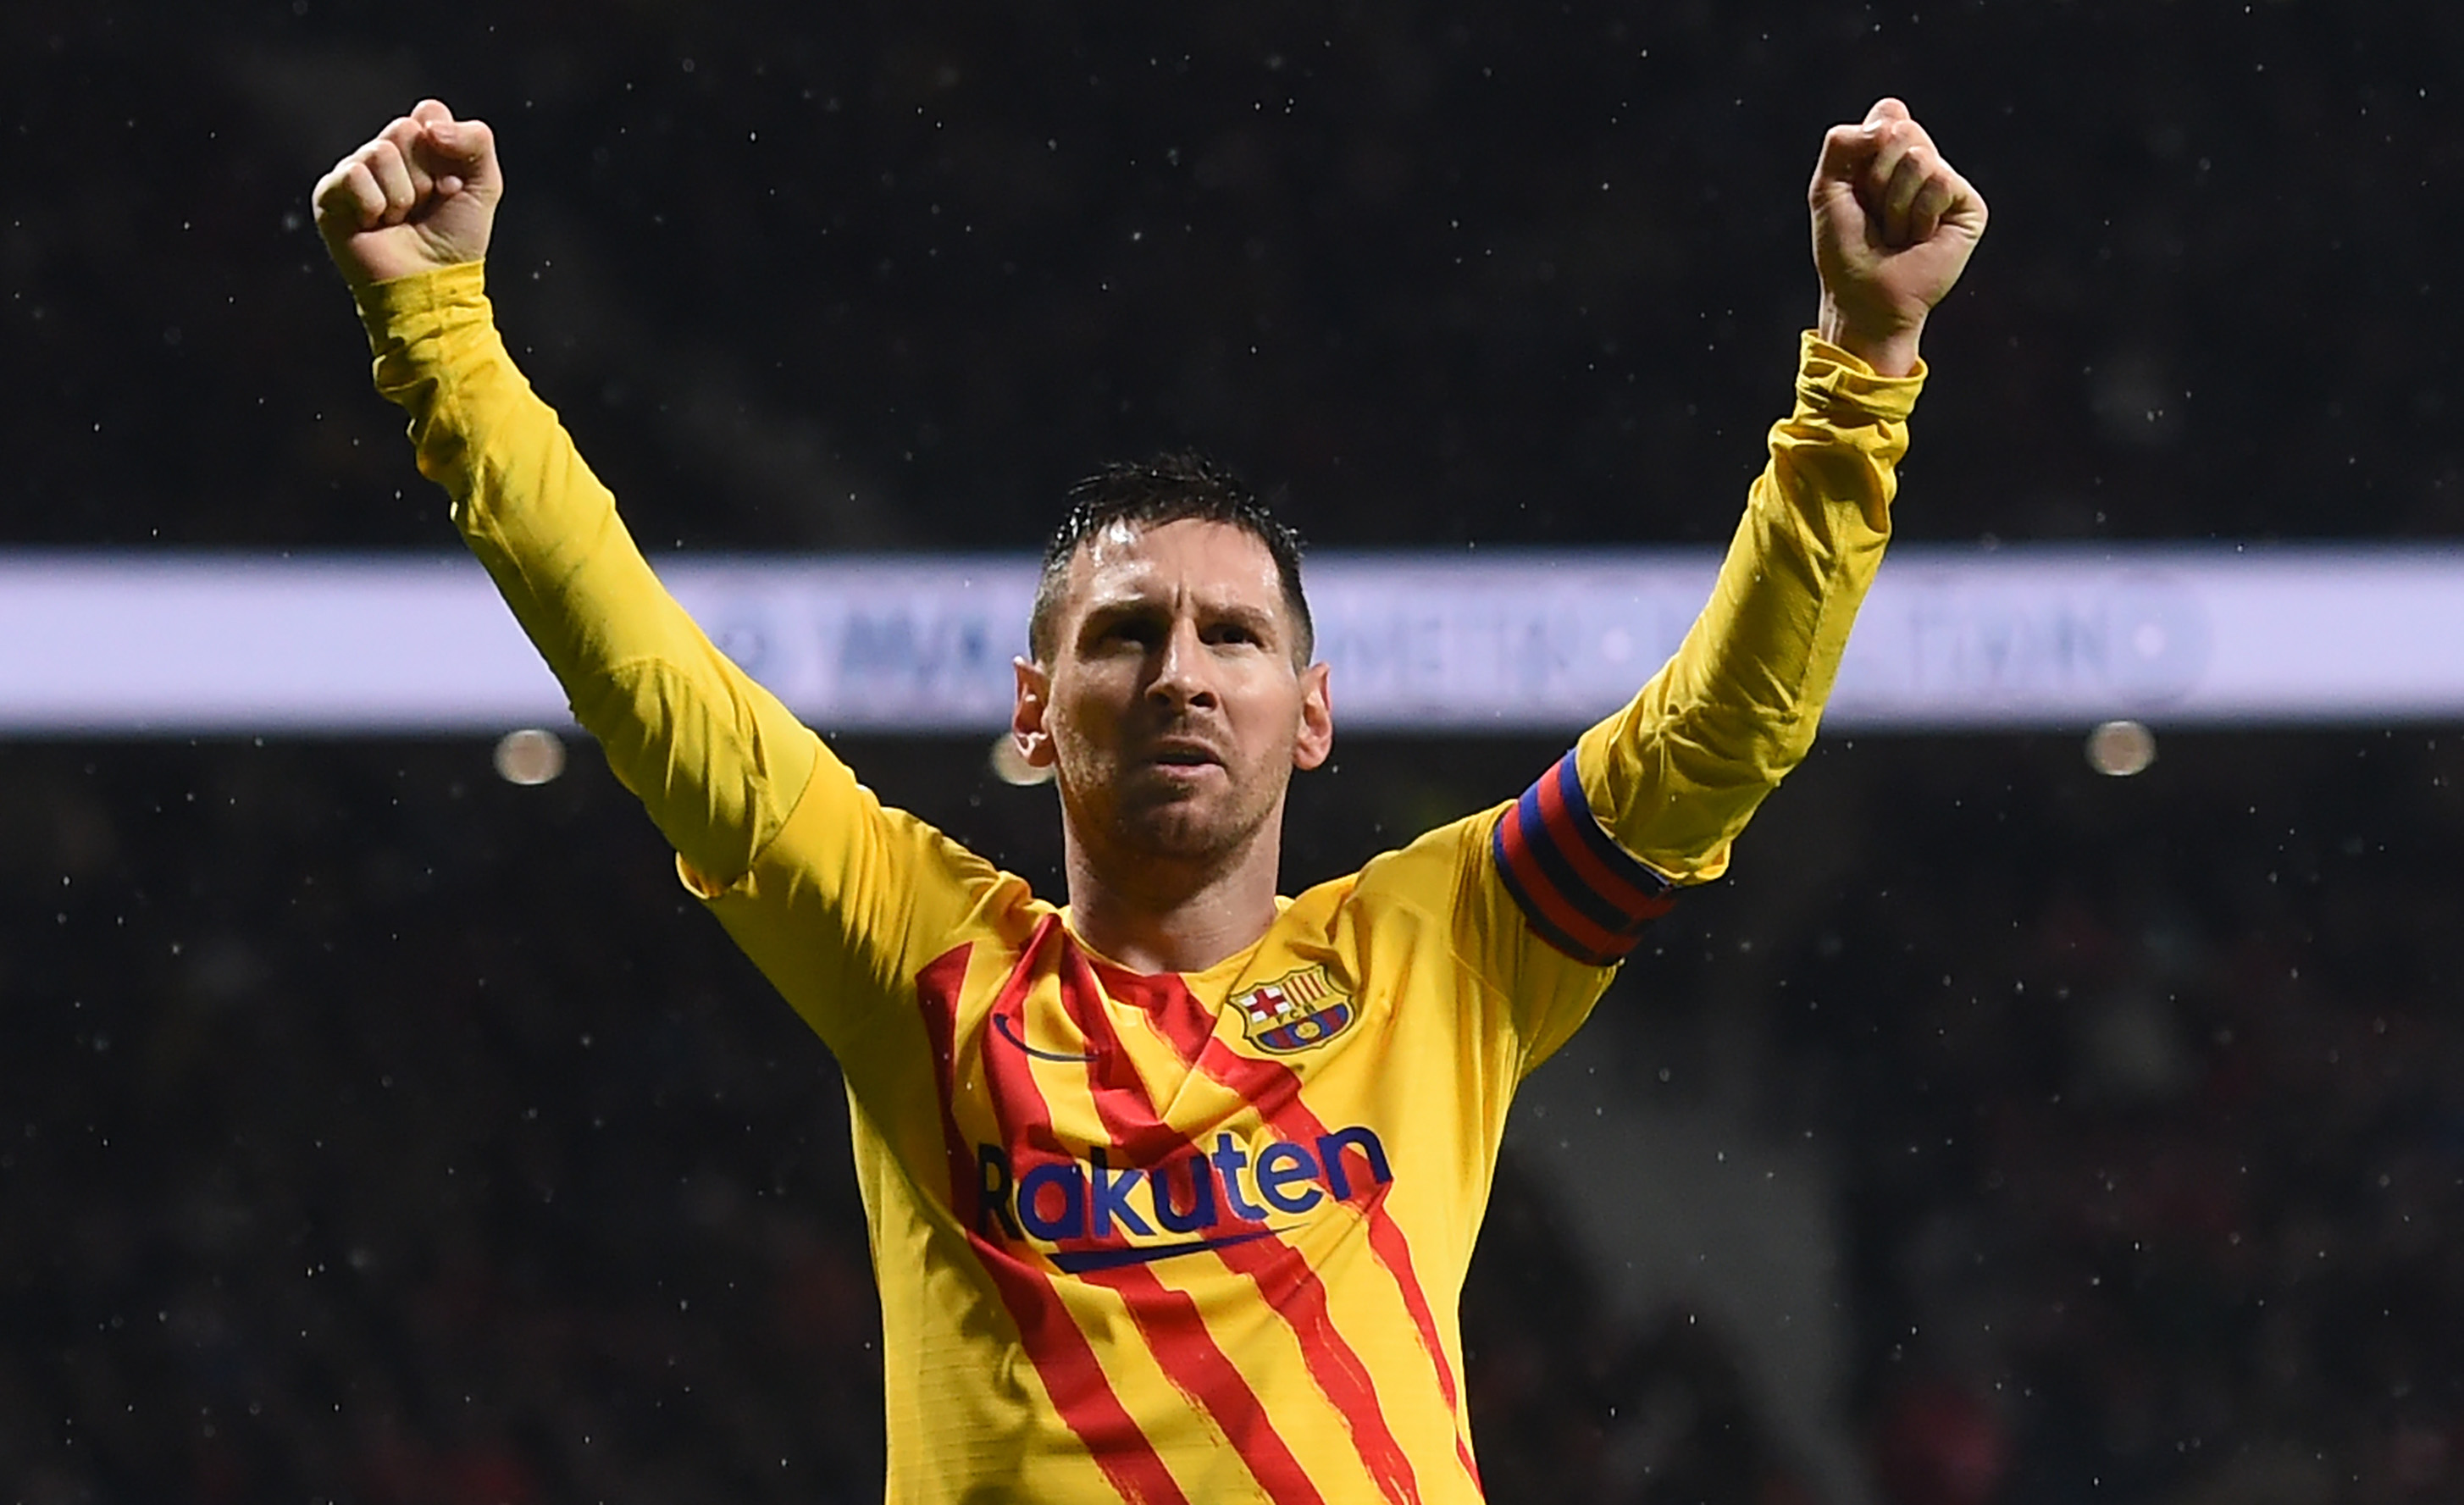 MADRID, SPAIN - DECEMBER 01: Lionel Messi of FC Barcelona celebrates after scoring his team's first goal during the Liga match between Club Atletico de Madrid and FC Barcelona at Wanda Metropolitano on December 01, 2019 in Madrid, Spain. (Photo by Denis Doyle/Getty Images)